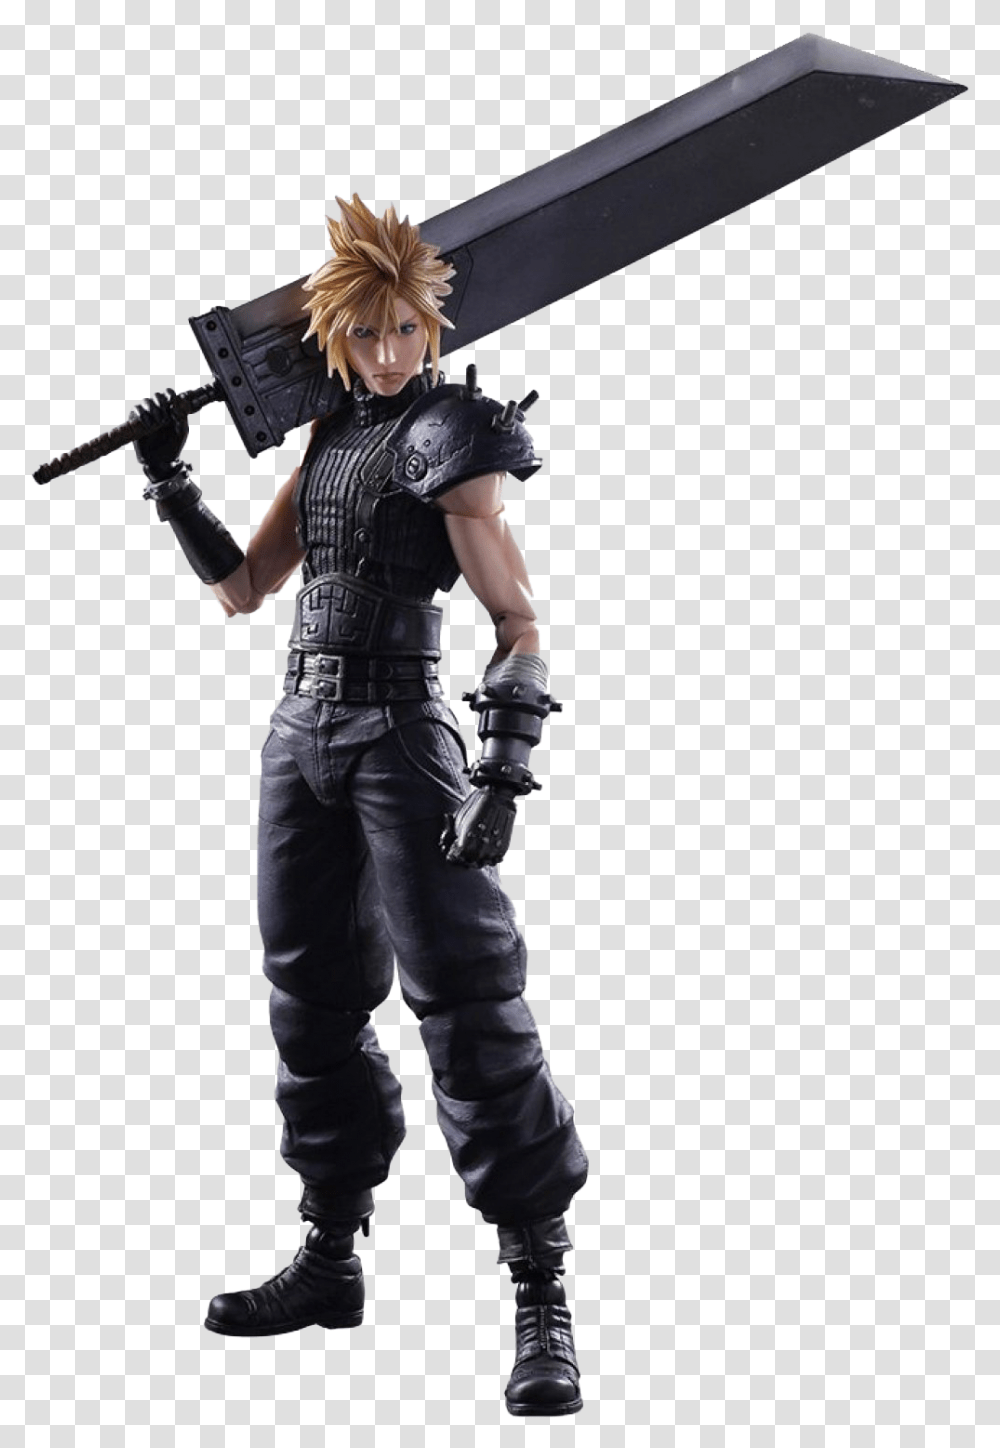 Final Fantasy Vii Remake Images All Cloud Strife, Person, Human, Costume, Tool Transparent Png